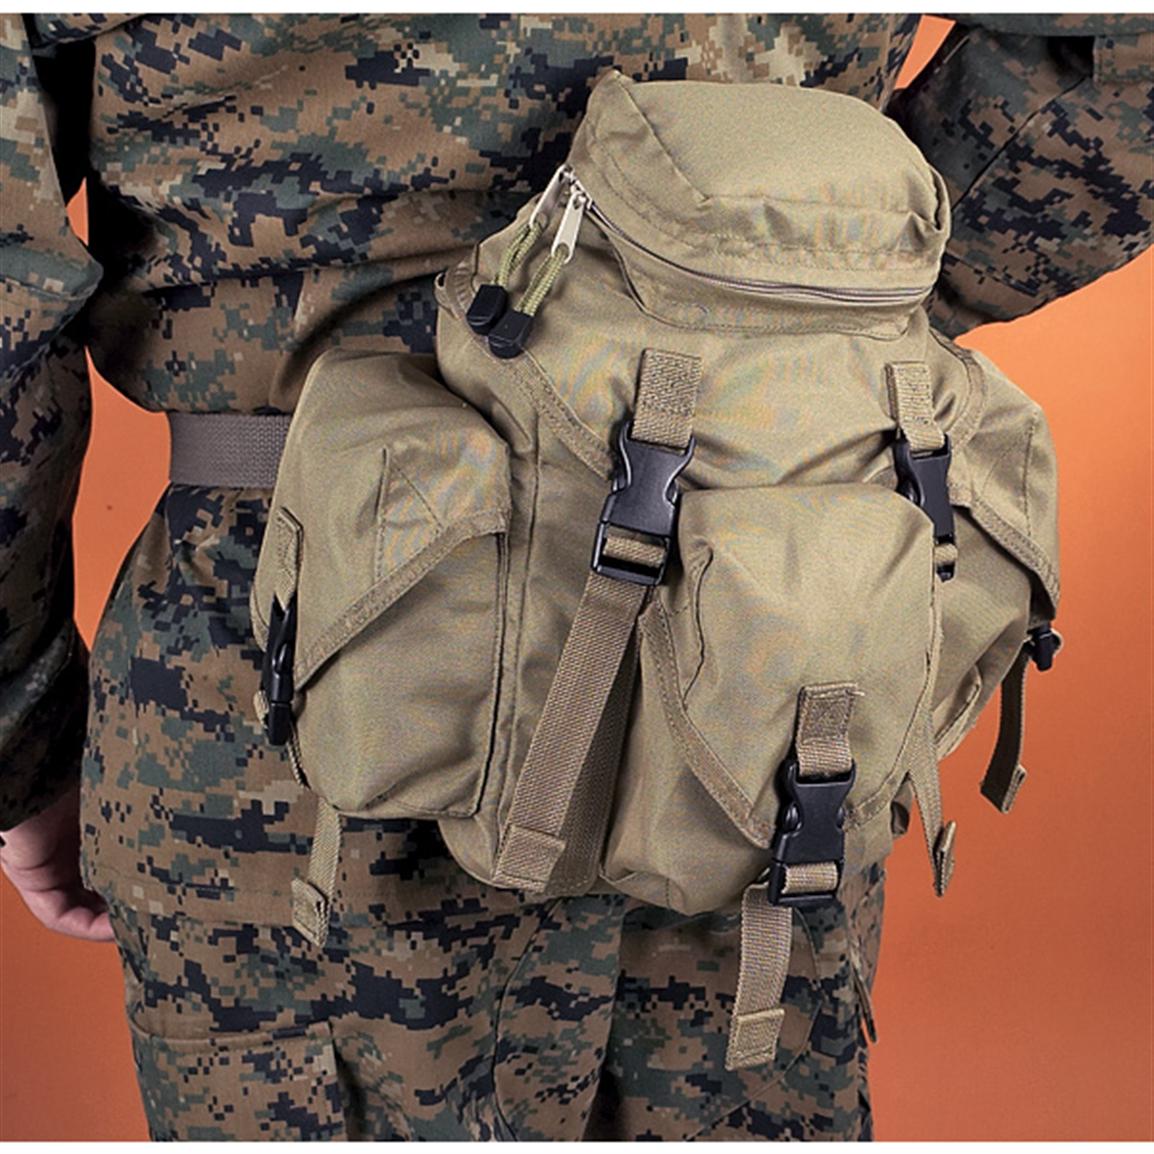 recon-butt-pack-25108-tactical-backpacks-bags-at-sportsman-s-guide